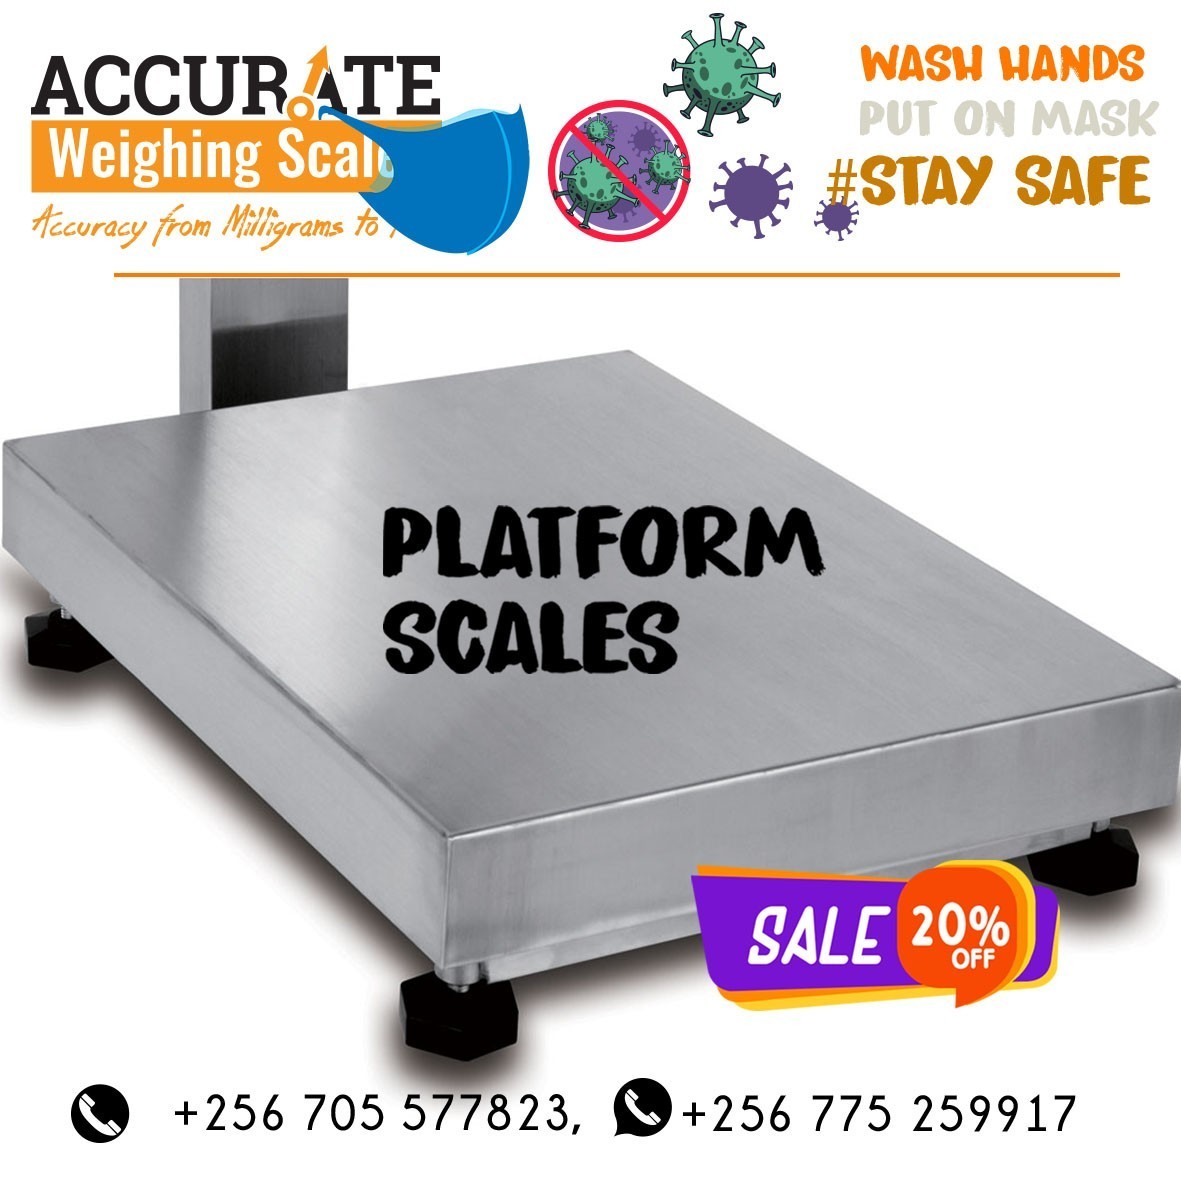 Factory floor balances checkered plate for heavy bags 256775259917